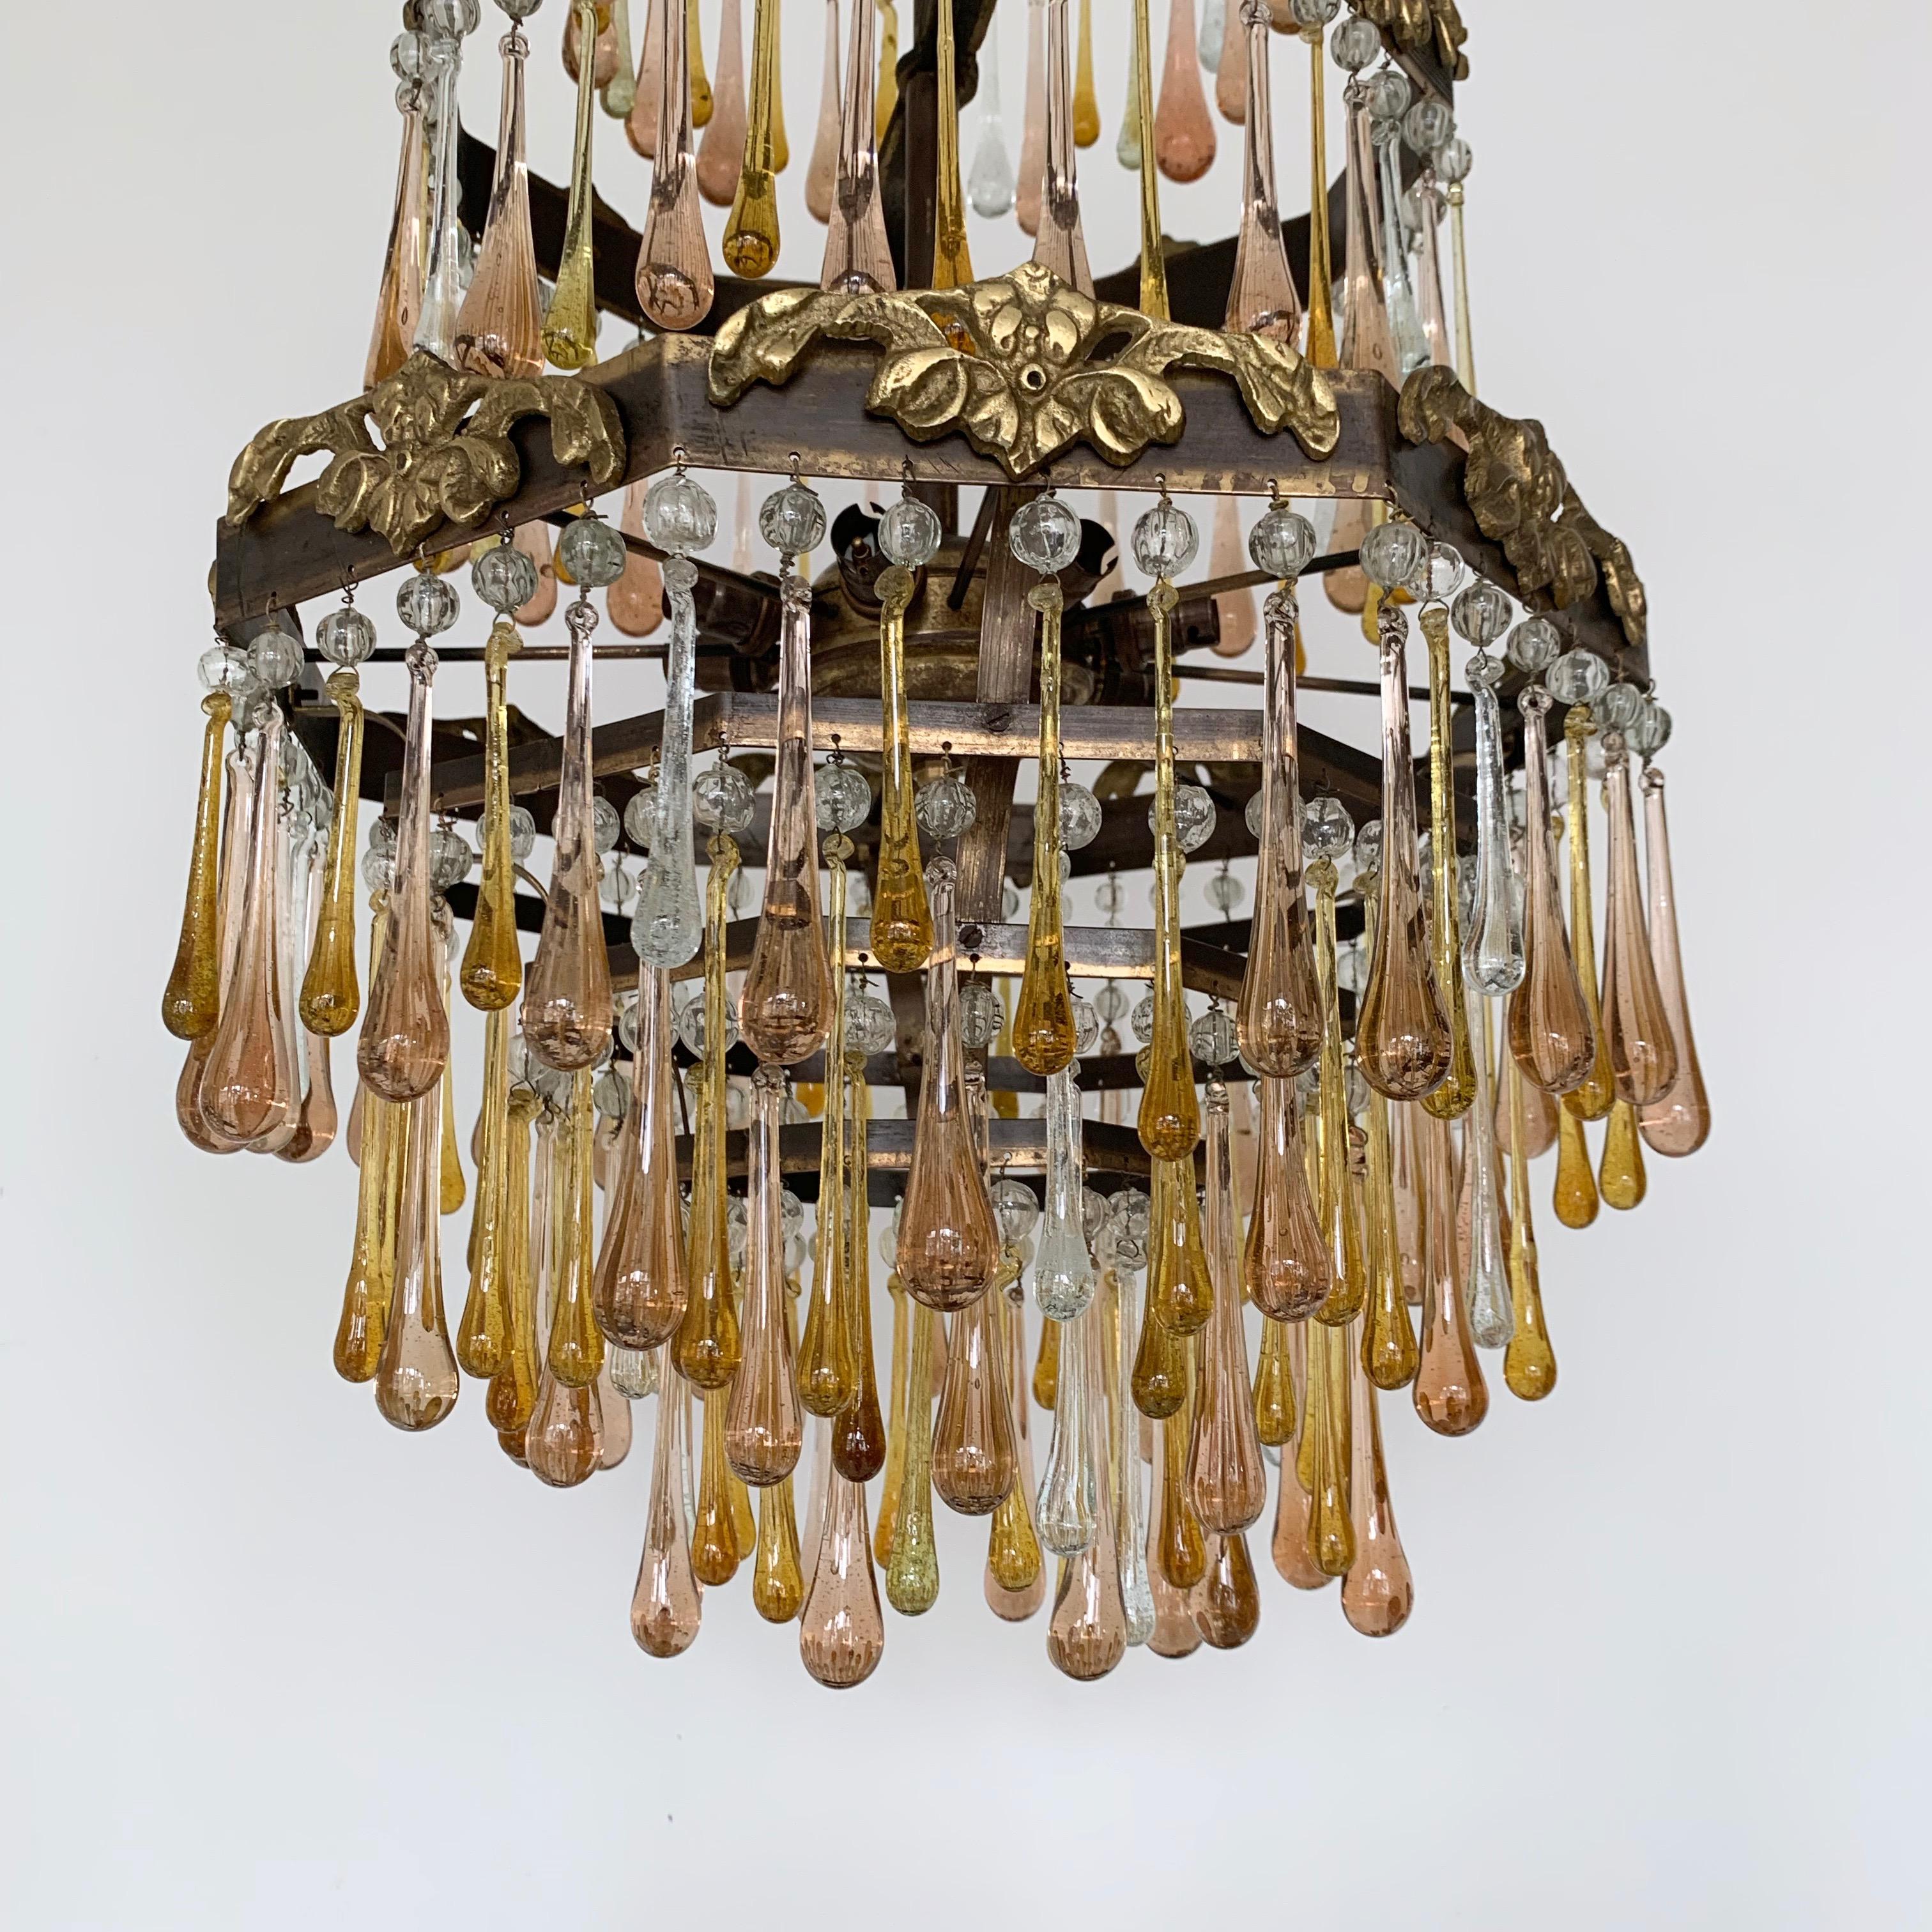 Early 1900s French Brass Waterfall Chandelier Frame Dressed in Peach and Amber For Sale 2